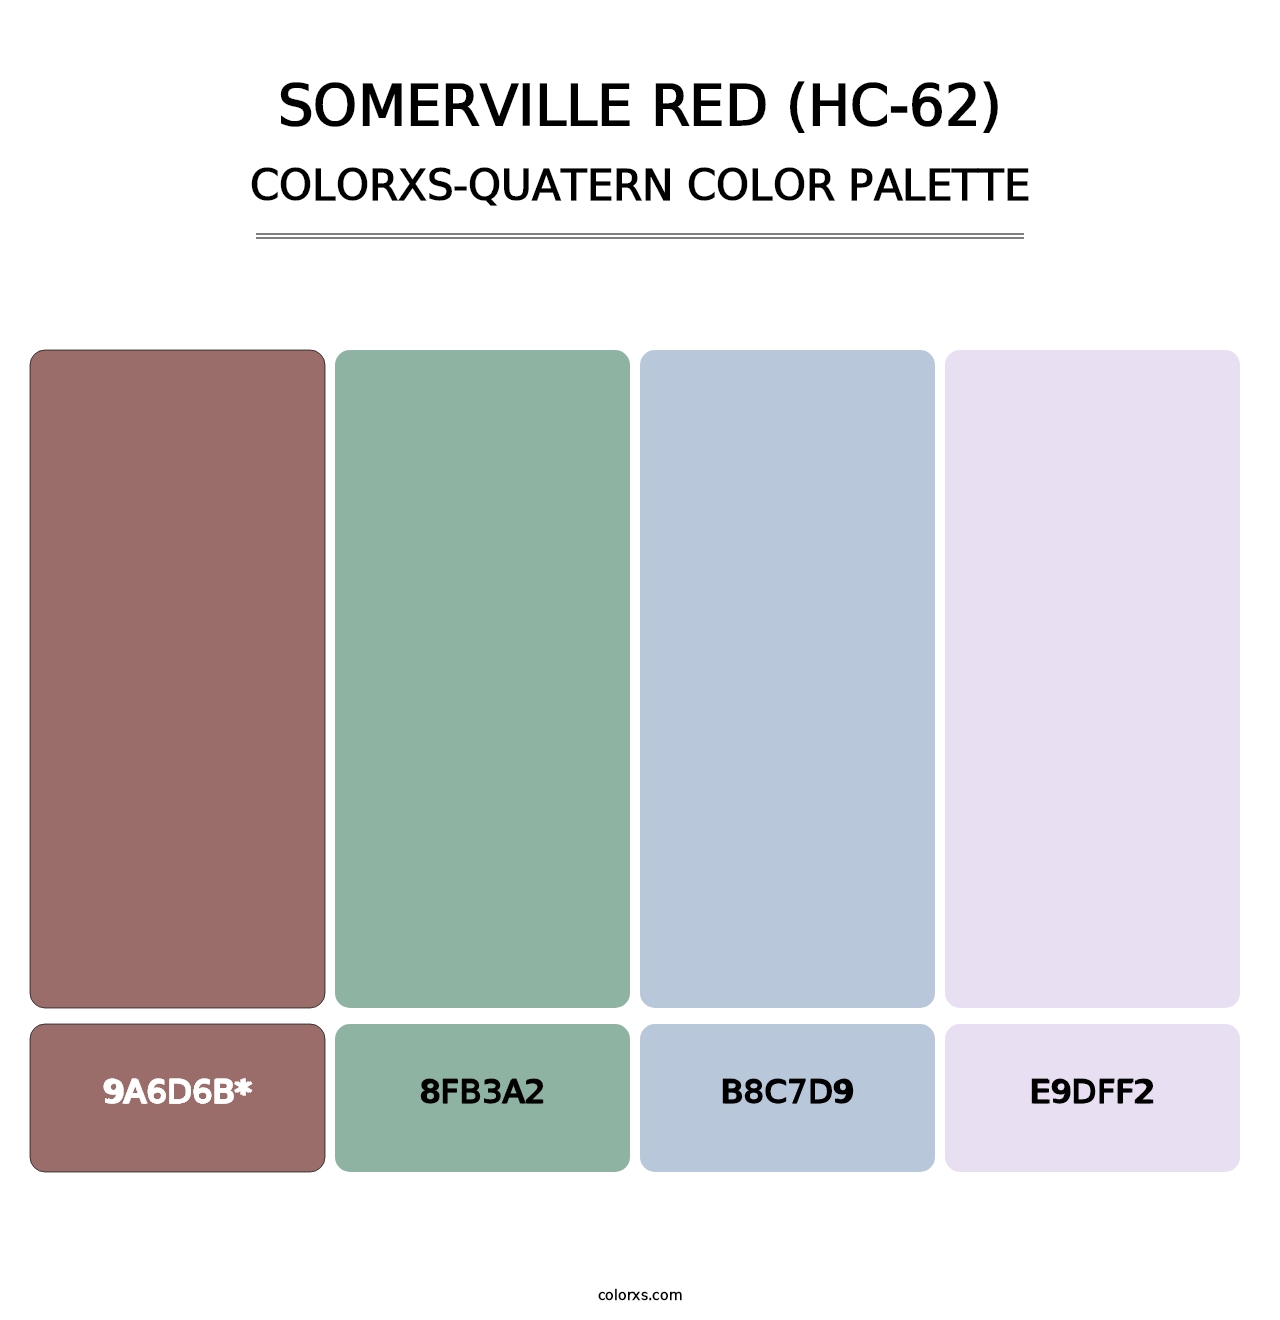 Somerville Red (HC-62) - Colorxs Quatern Palette